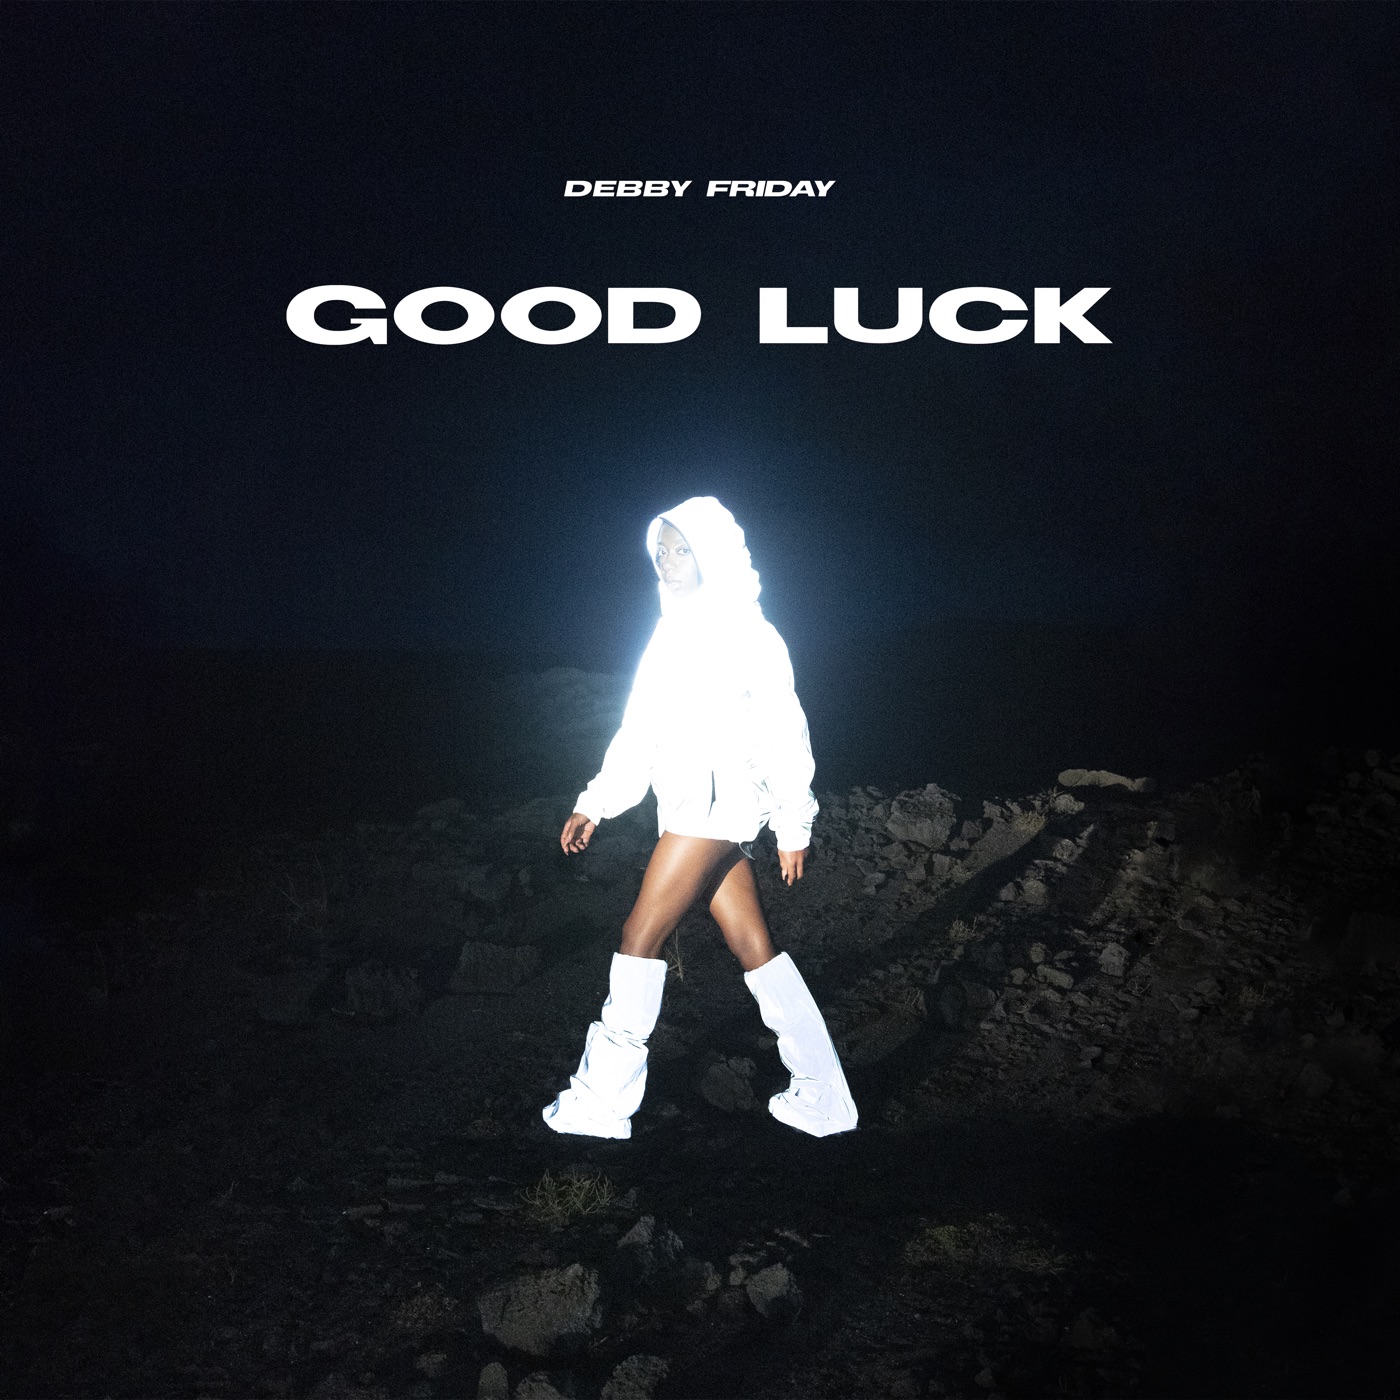 GOOD LUCK by DEBBY FRIDAY